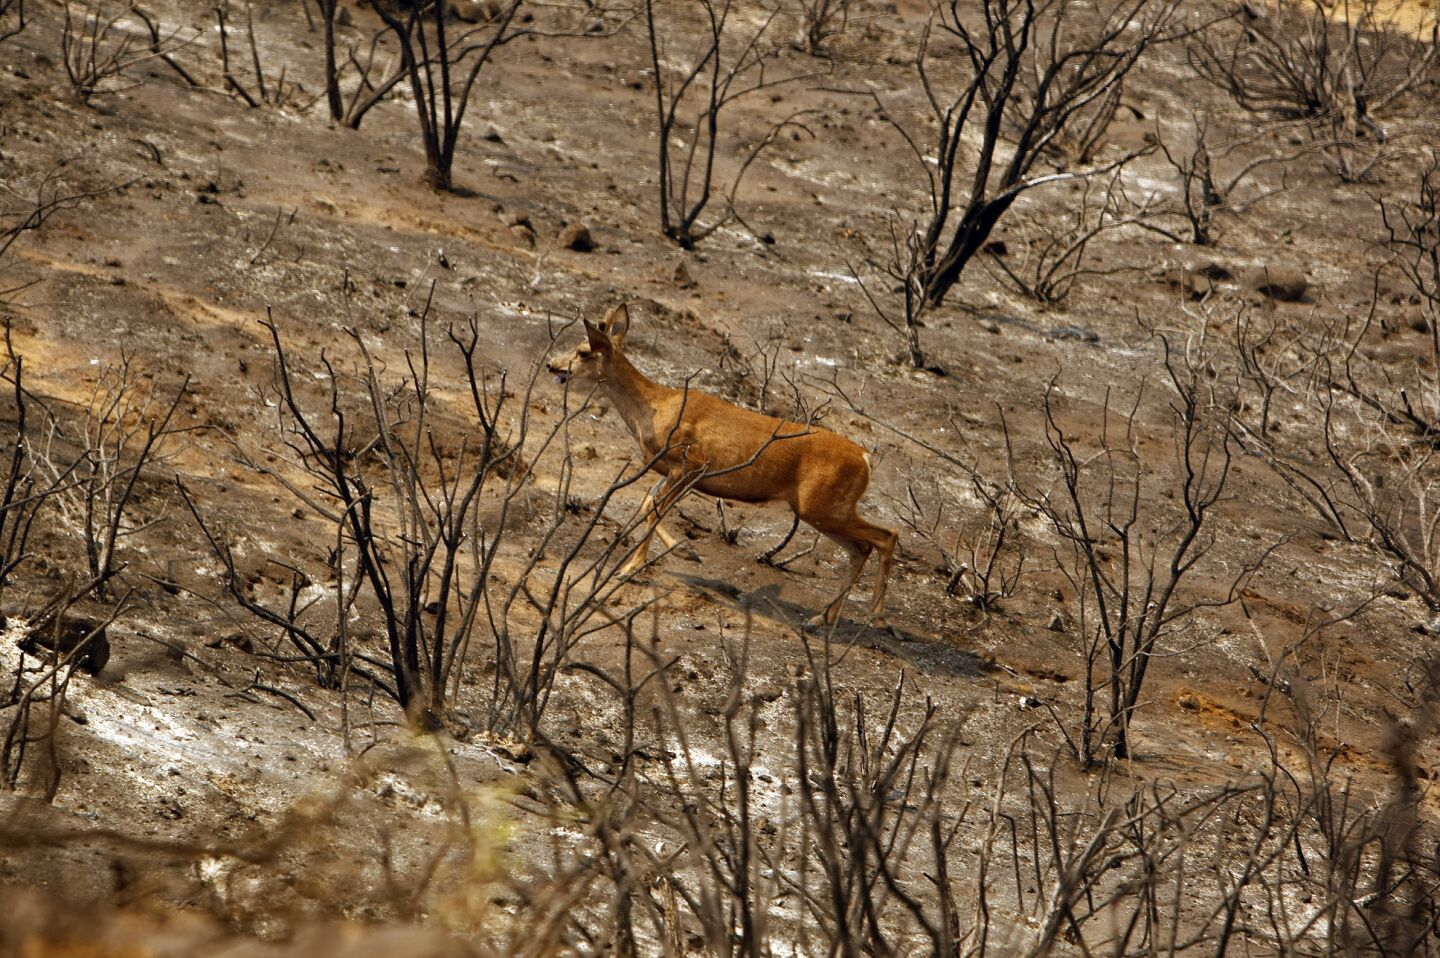 A deer runs across burnt landscape from the Springs fire in the mountains above Malibu.